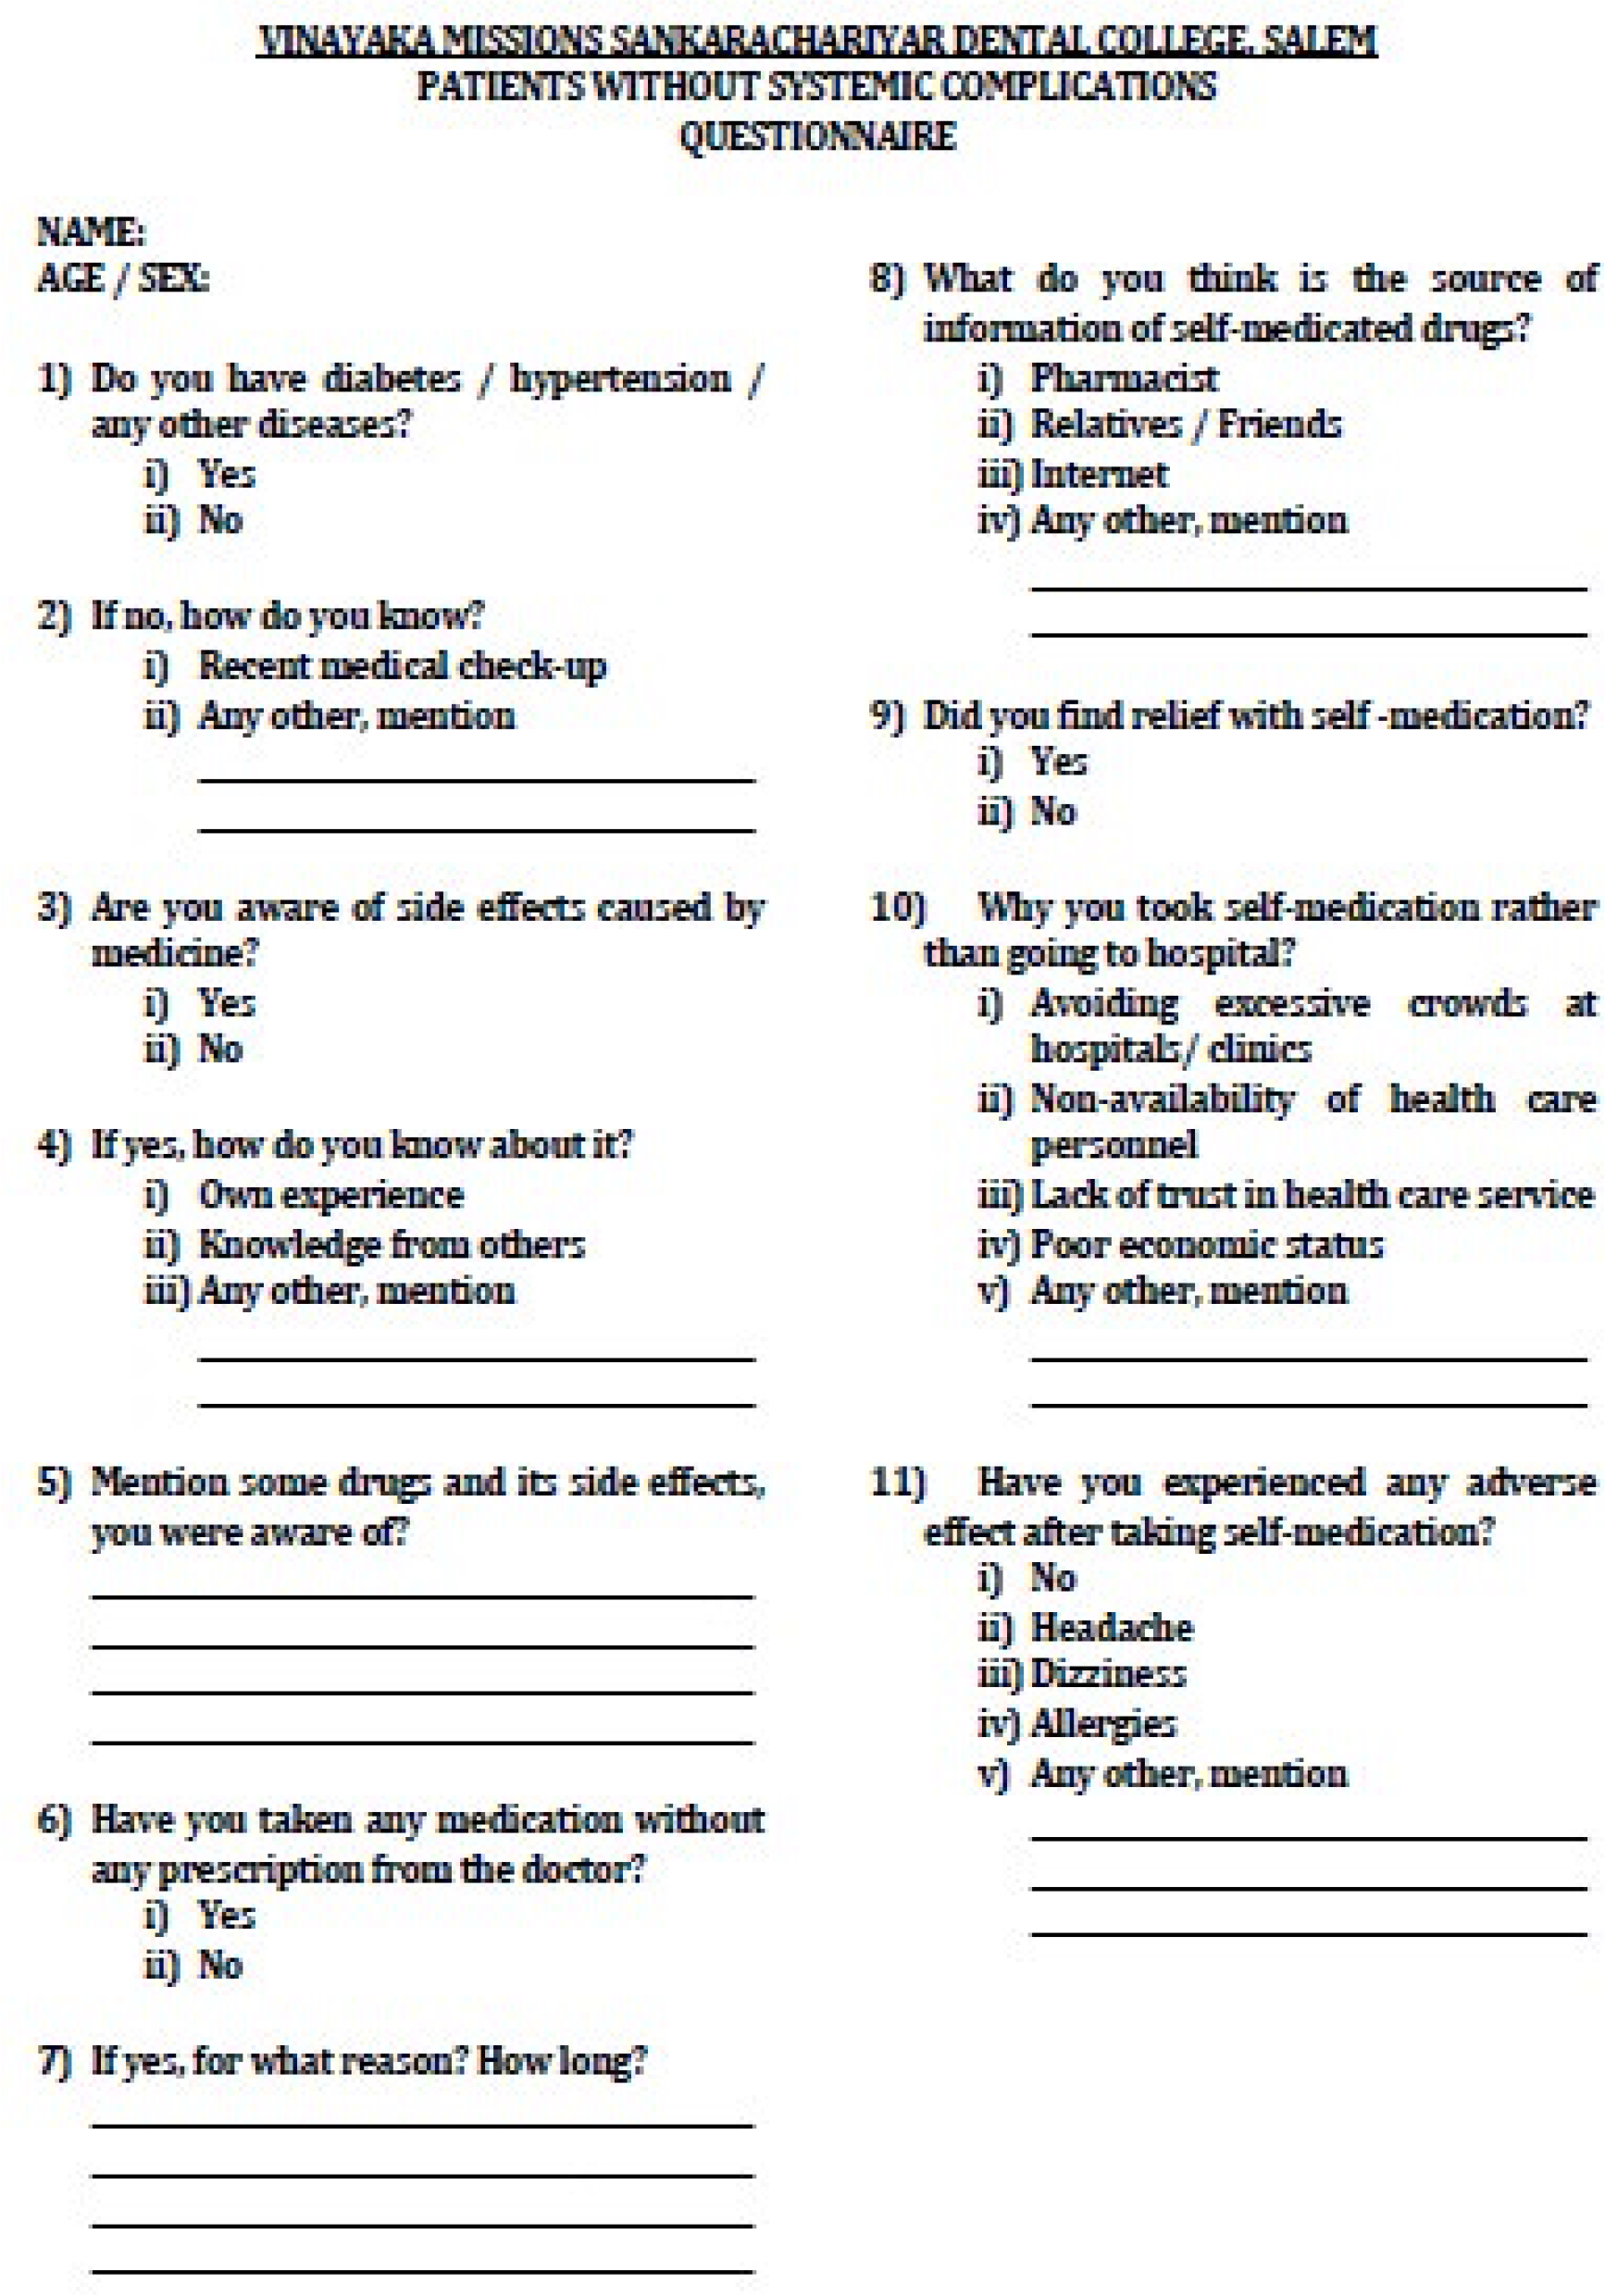 Questionnaire for participants of Group II.